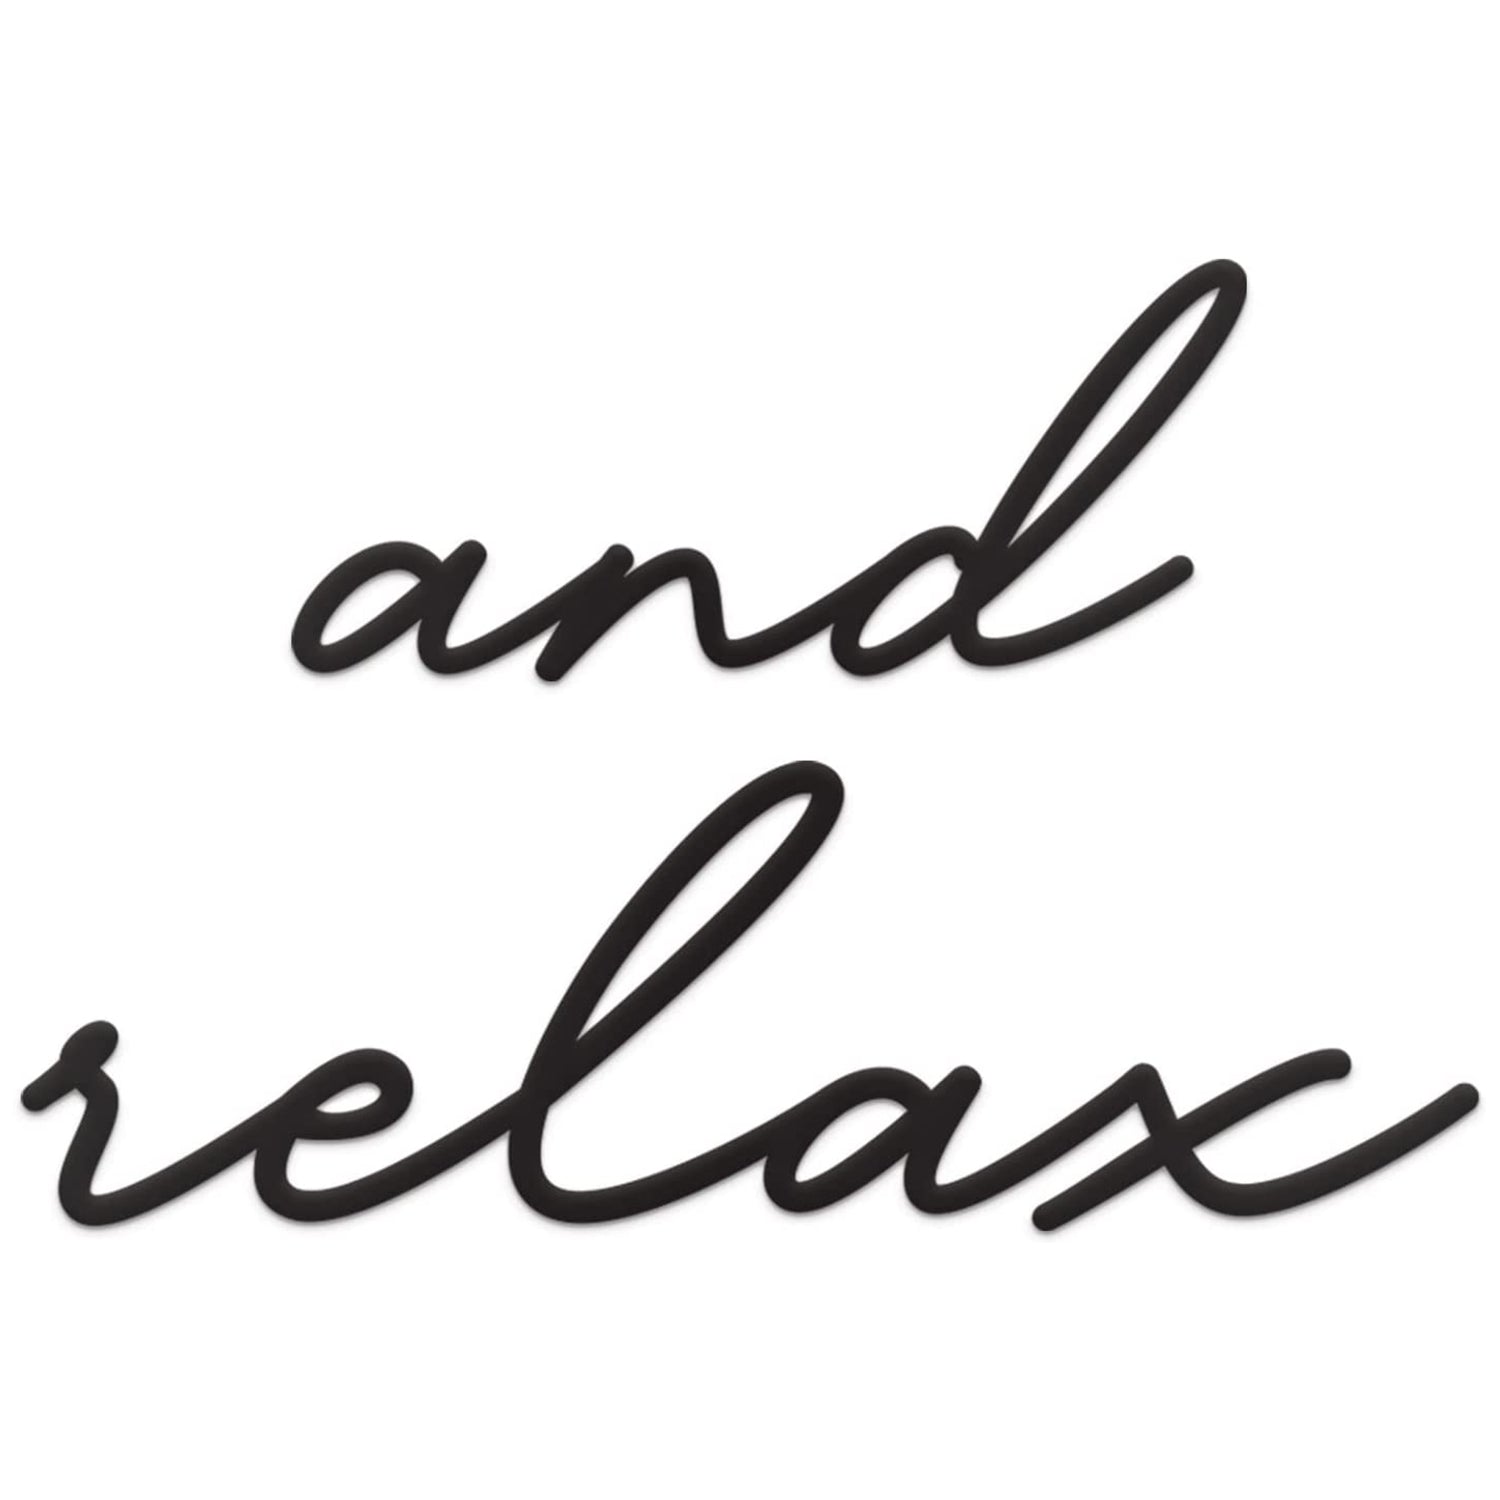 And Relax Sign Metal Wall Sign - 18"X12" Perfect Relax Wall Sign Bathroom Decorations for Wall Decor